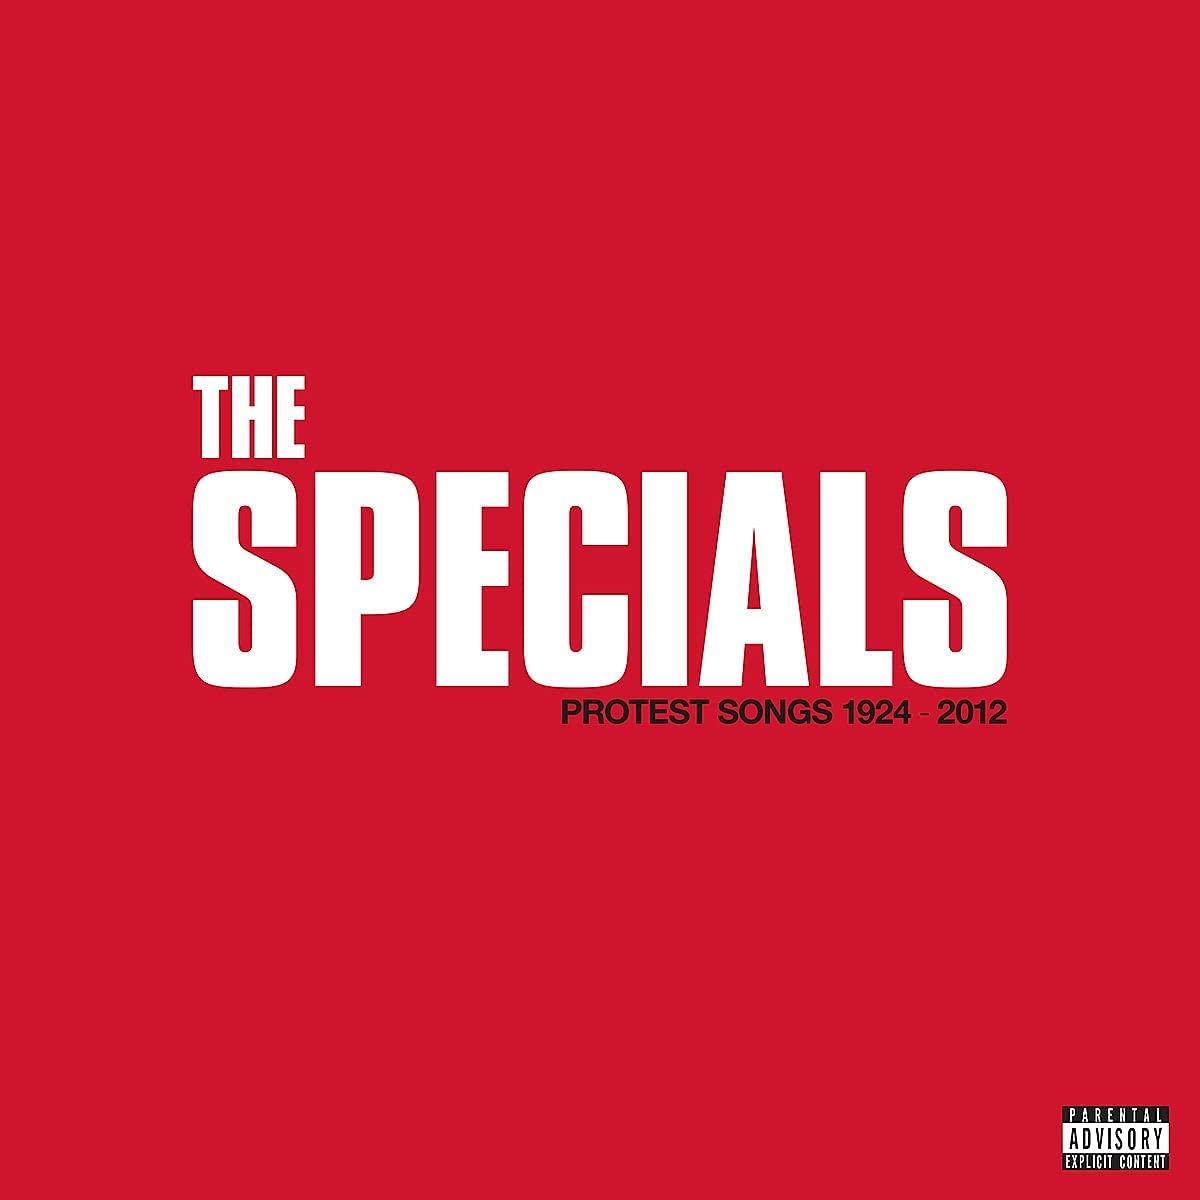 THE SPECIALS - Protest Songs 1924-2012 [Deluxe Ed. w/ 2 Exclusive Tracks] - Mintpack CD